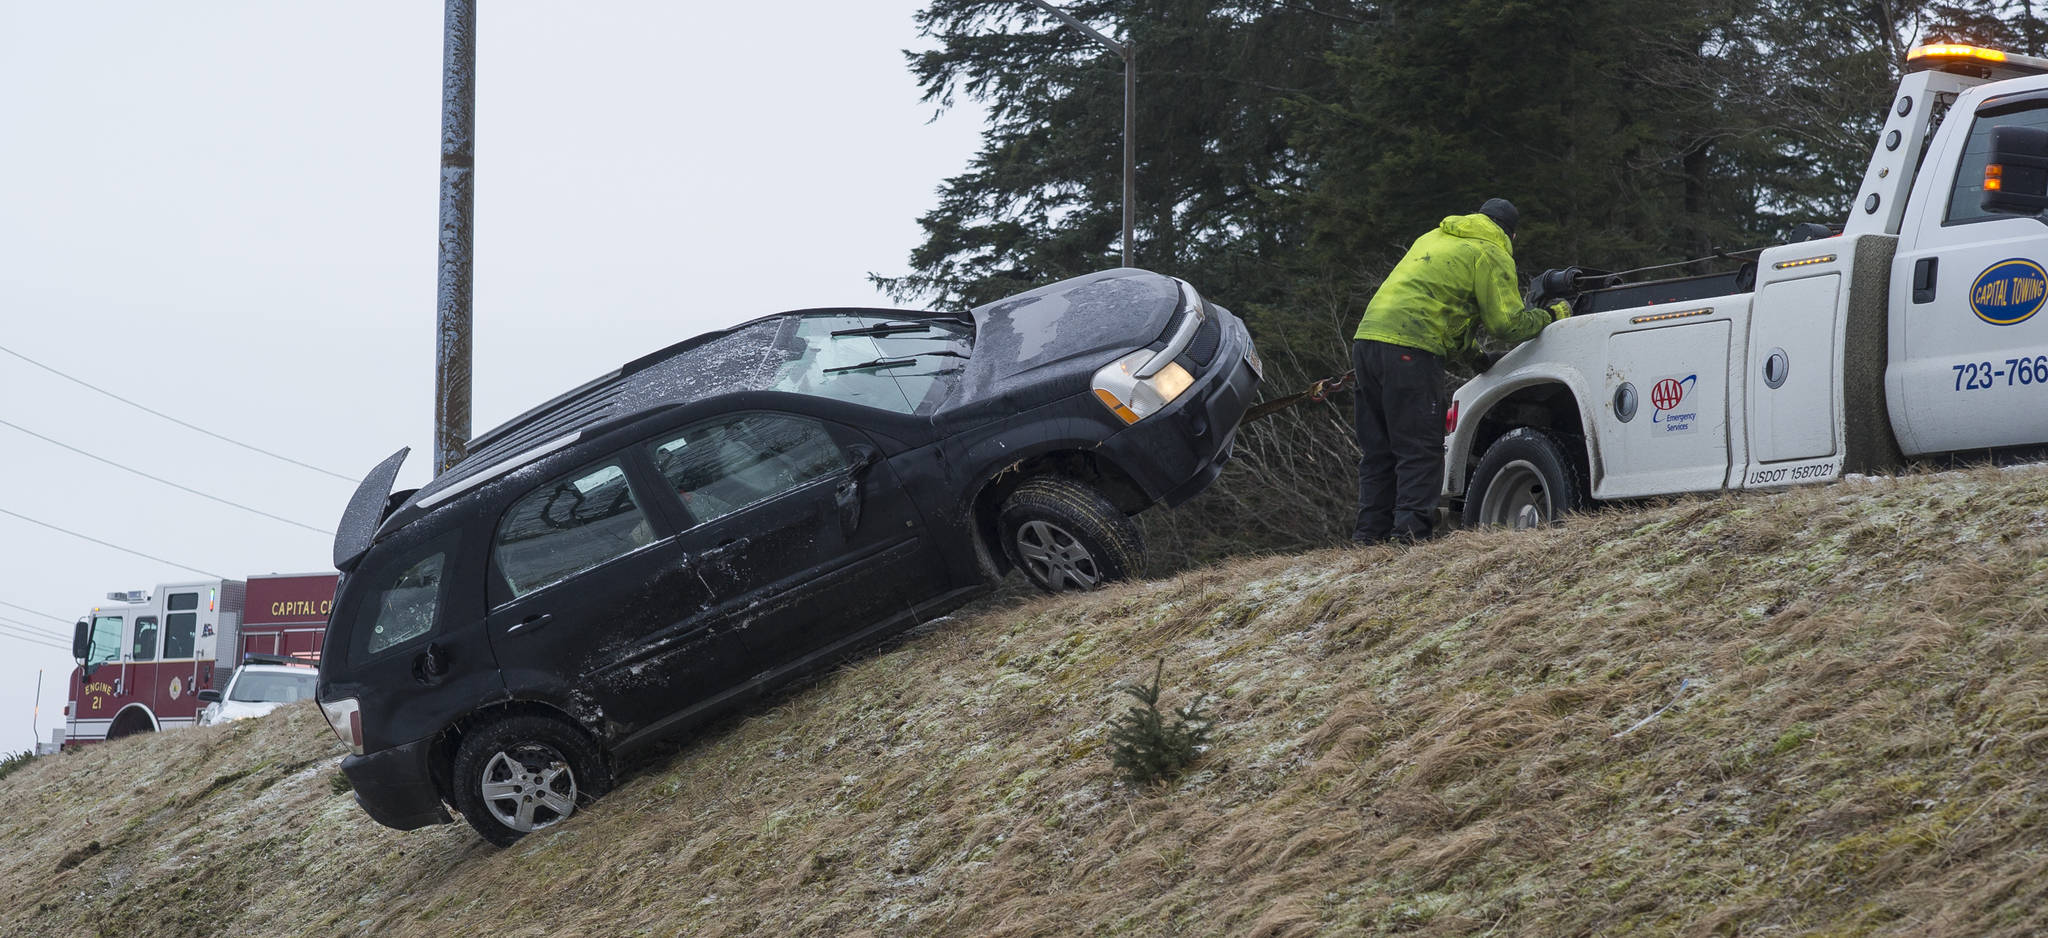 Michael Penn | Juneau Empire  A Capital Towing company employee pulls a vehicle up the embankment at Twin Lakes on Tuesday. The driver suffered minor injuries in the one vehicle accident.